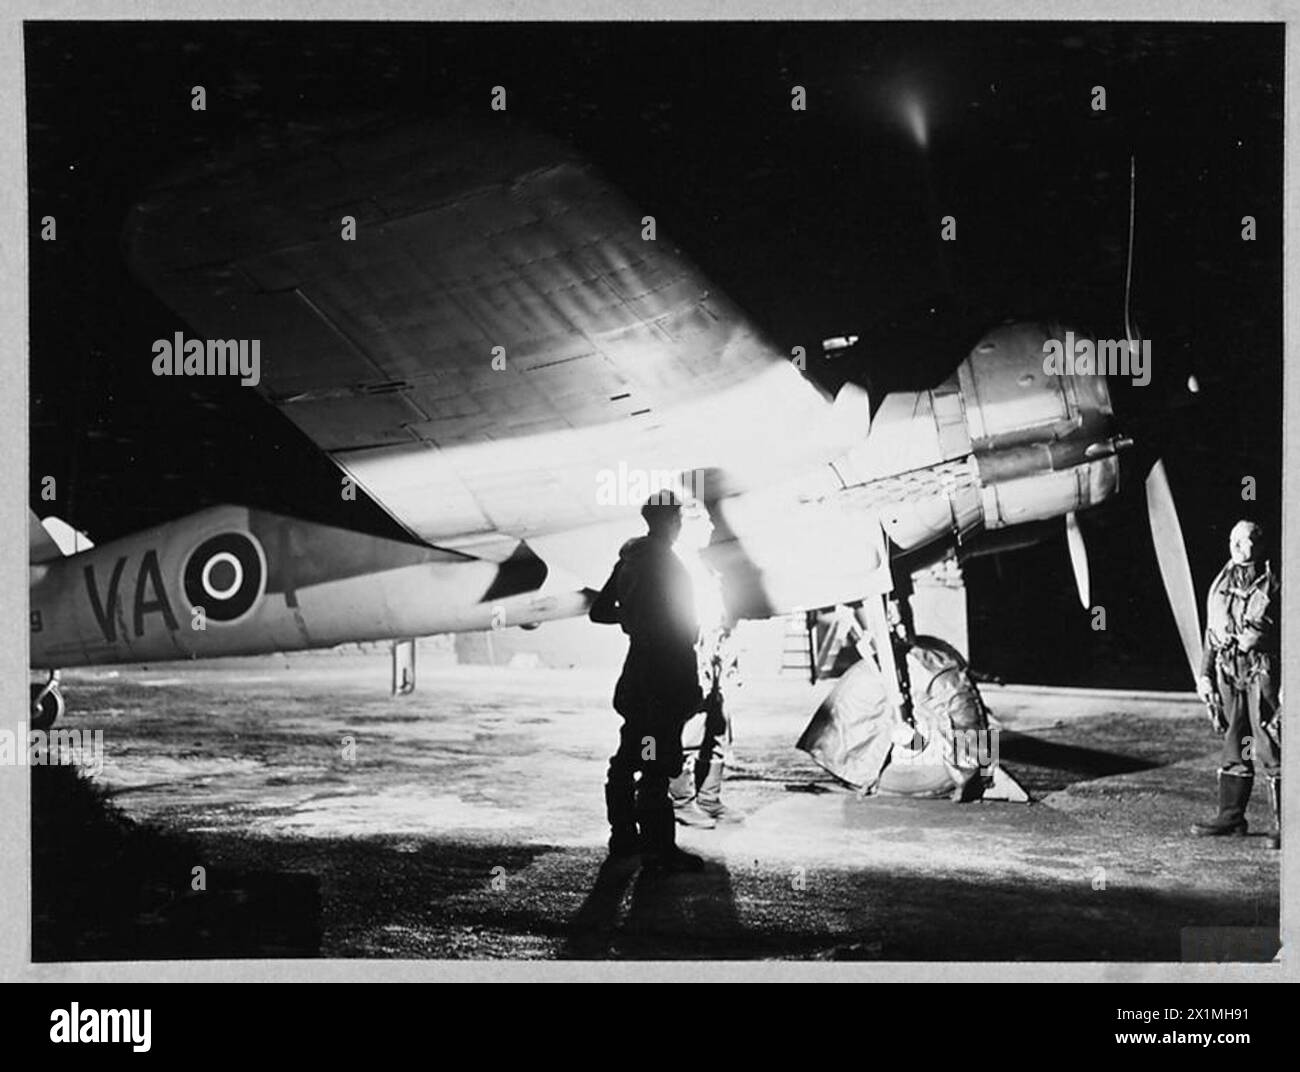 NIGHT BEAUFIGHTERS IN READINESS : - For introduction see CH.11180. Picture (issued 1943) shows - 2.00 a.m. Searchlights on! Covers are removed and crews stand by to take off in search of a single enemy aircraft, Royal Air Force Stock Photo